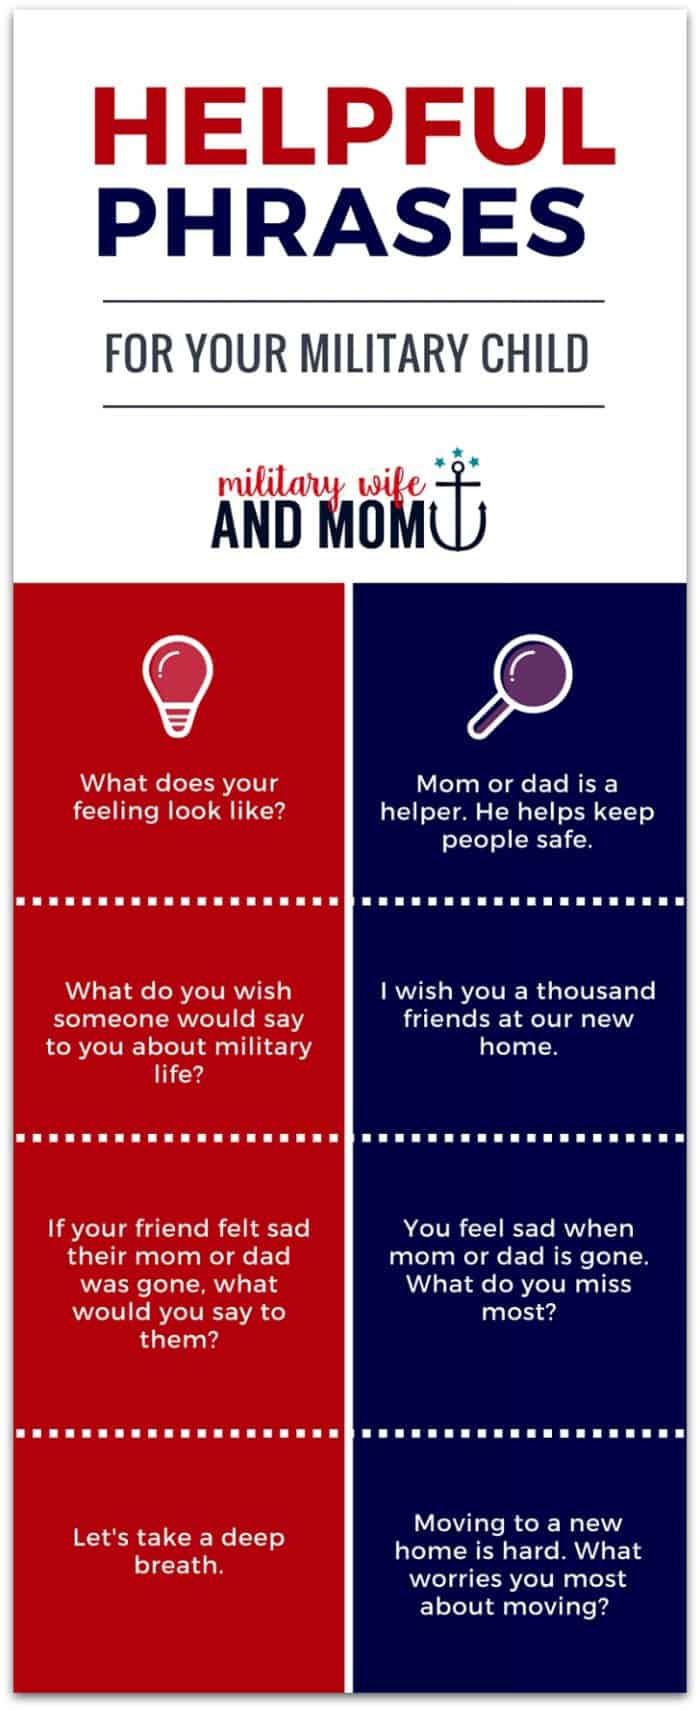 Helpful phrases to say to your military child or military kid. Useful during military deployment, military homecoming and military PCS moves. 